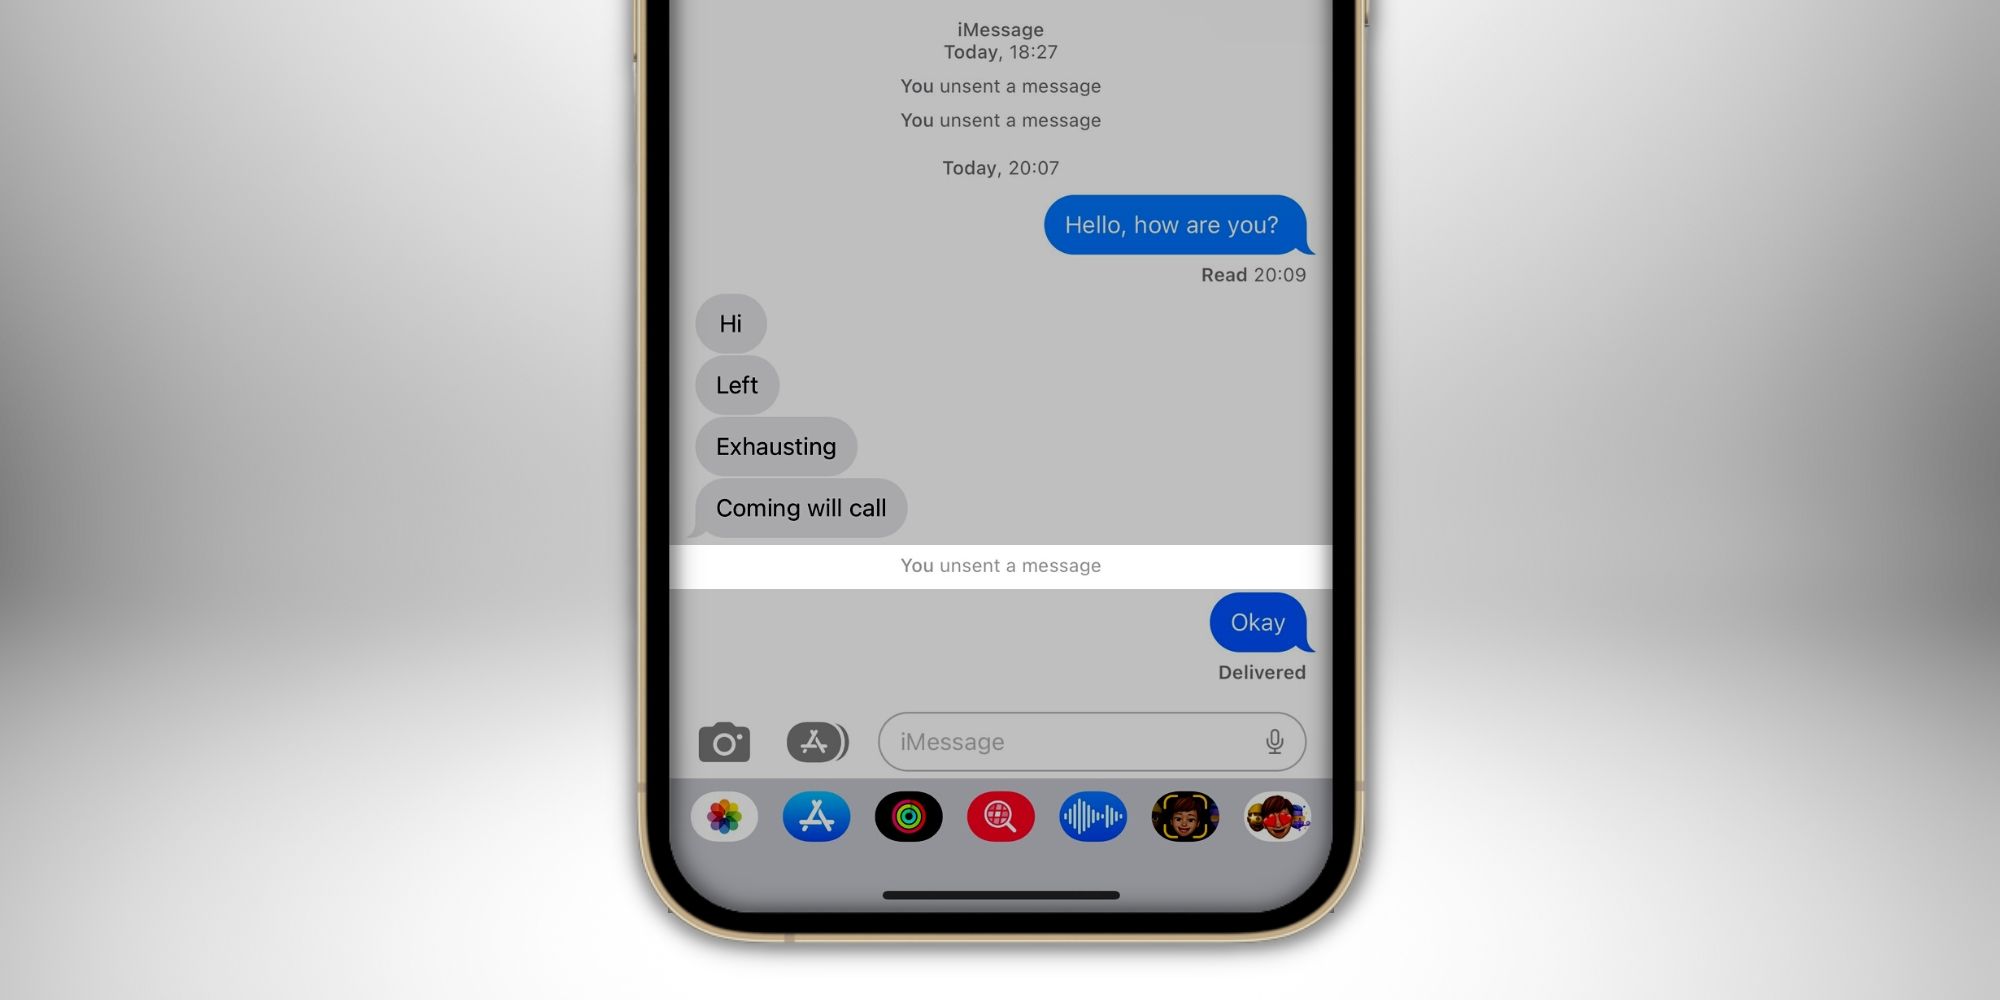 Screenshot of the Apple Messages app showing a notification about unsent message